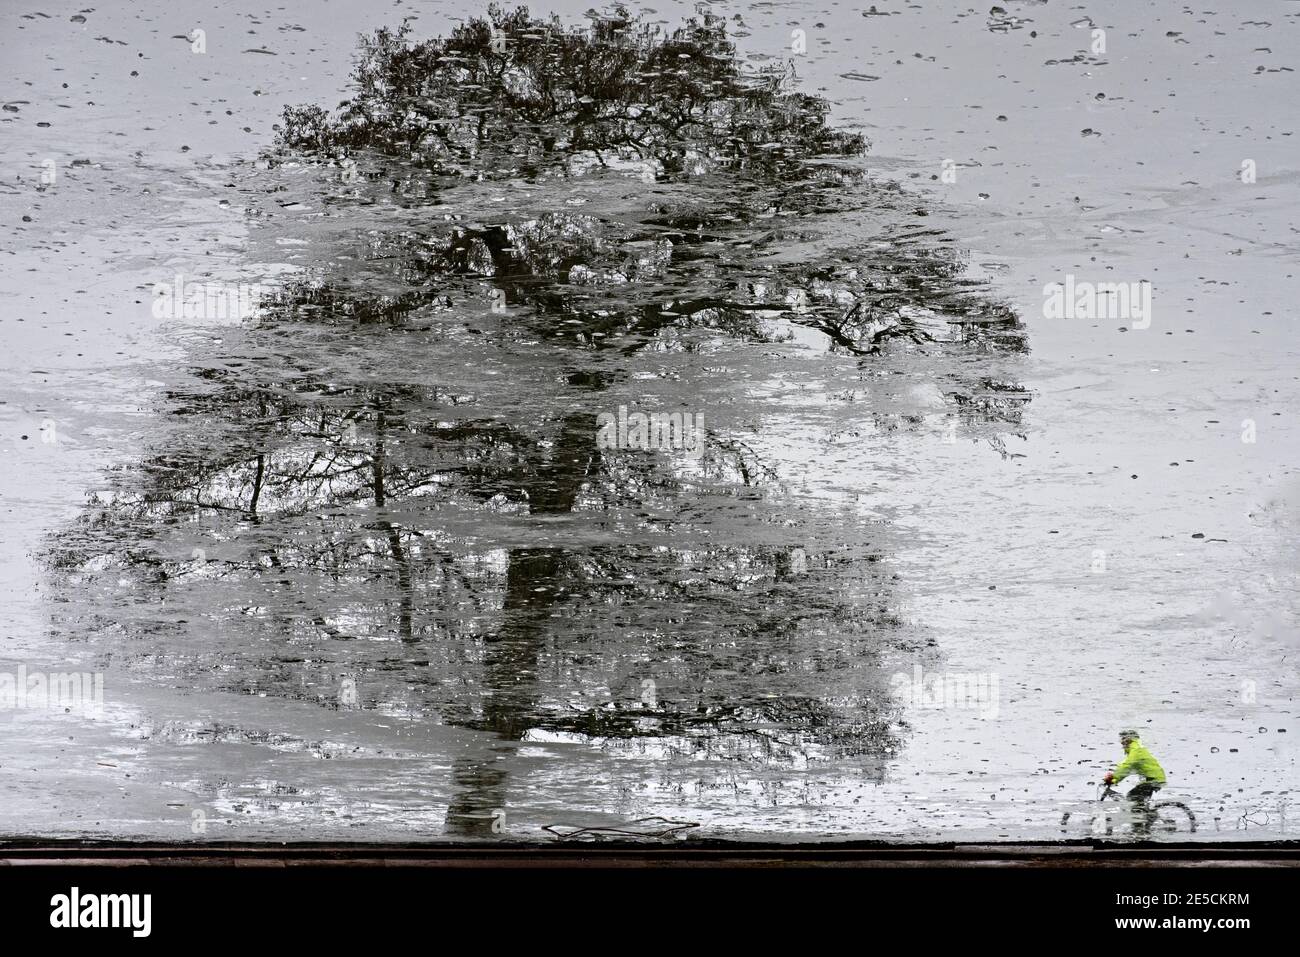 Reflection of a cyclist and tree on a frozen pond in Inverleith Park, Edinburgh, Scotland, UK. Stock Photo